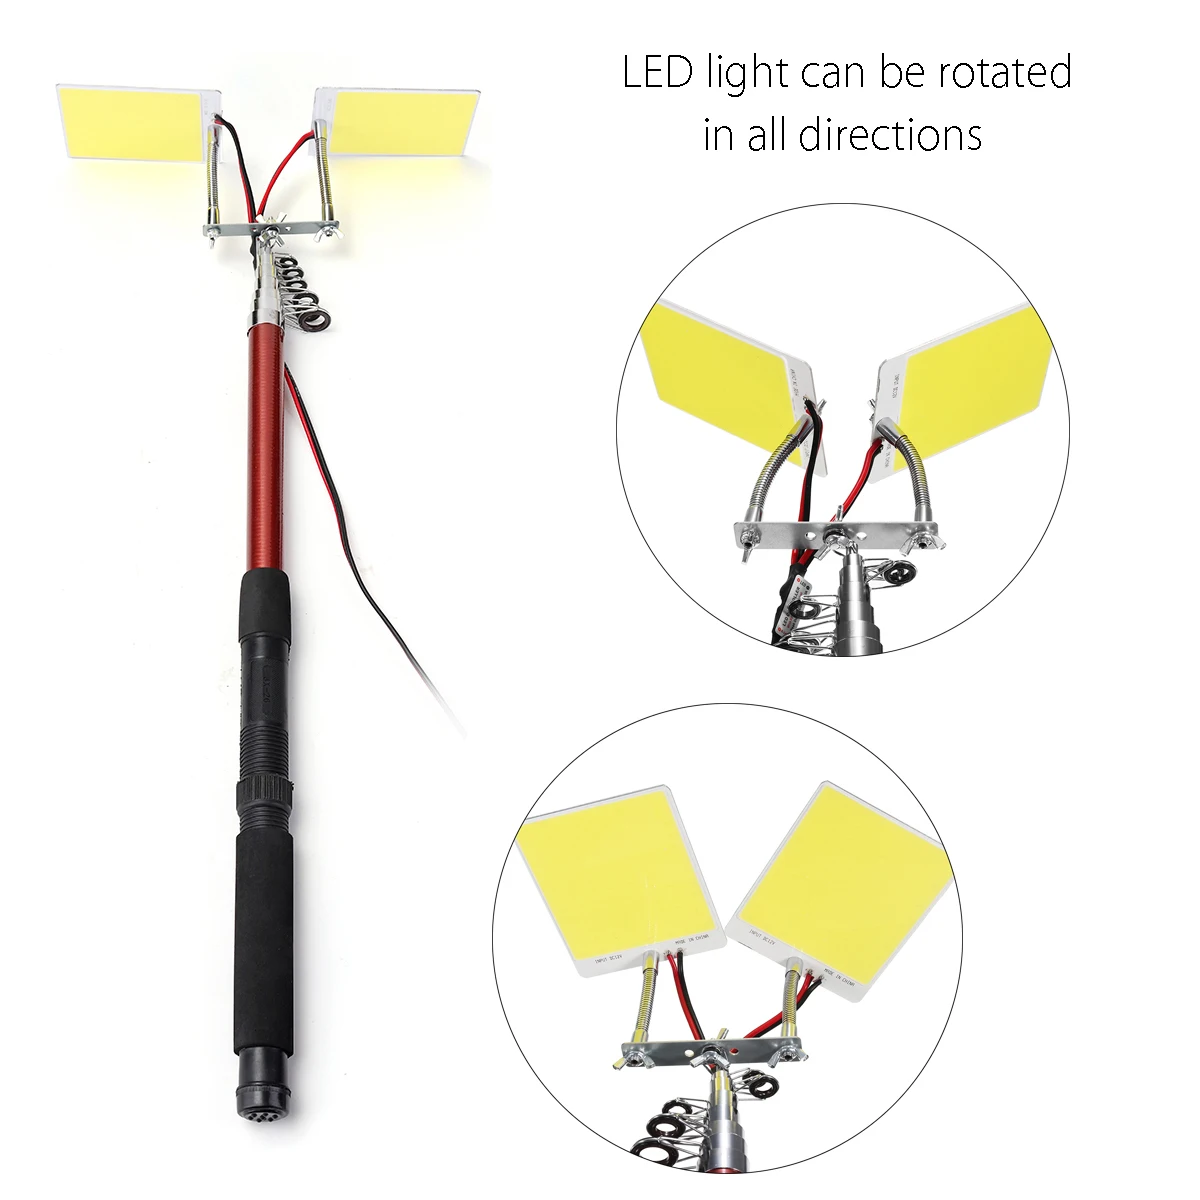 DC12V Telescopic Fishing pole Light Cob LED Outdoor camping lamps  Angle Adjustable